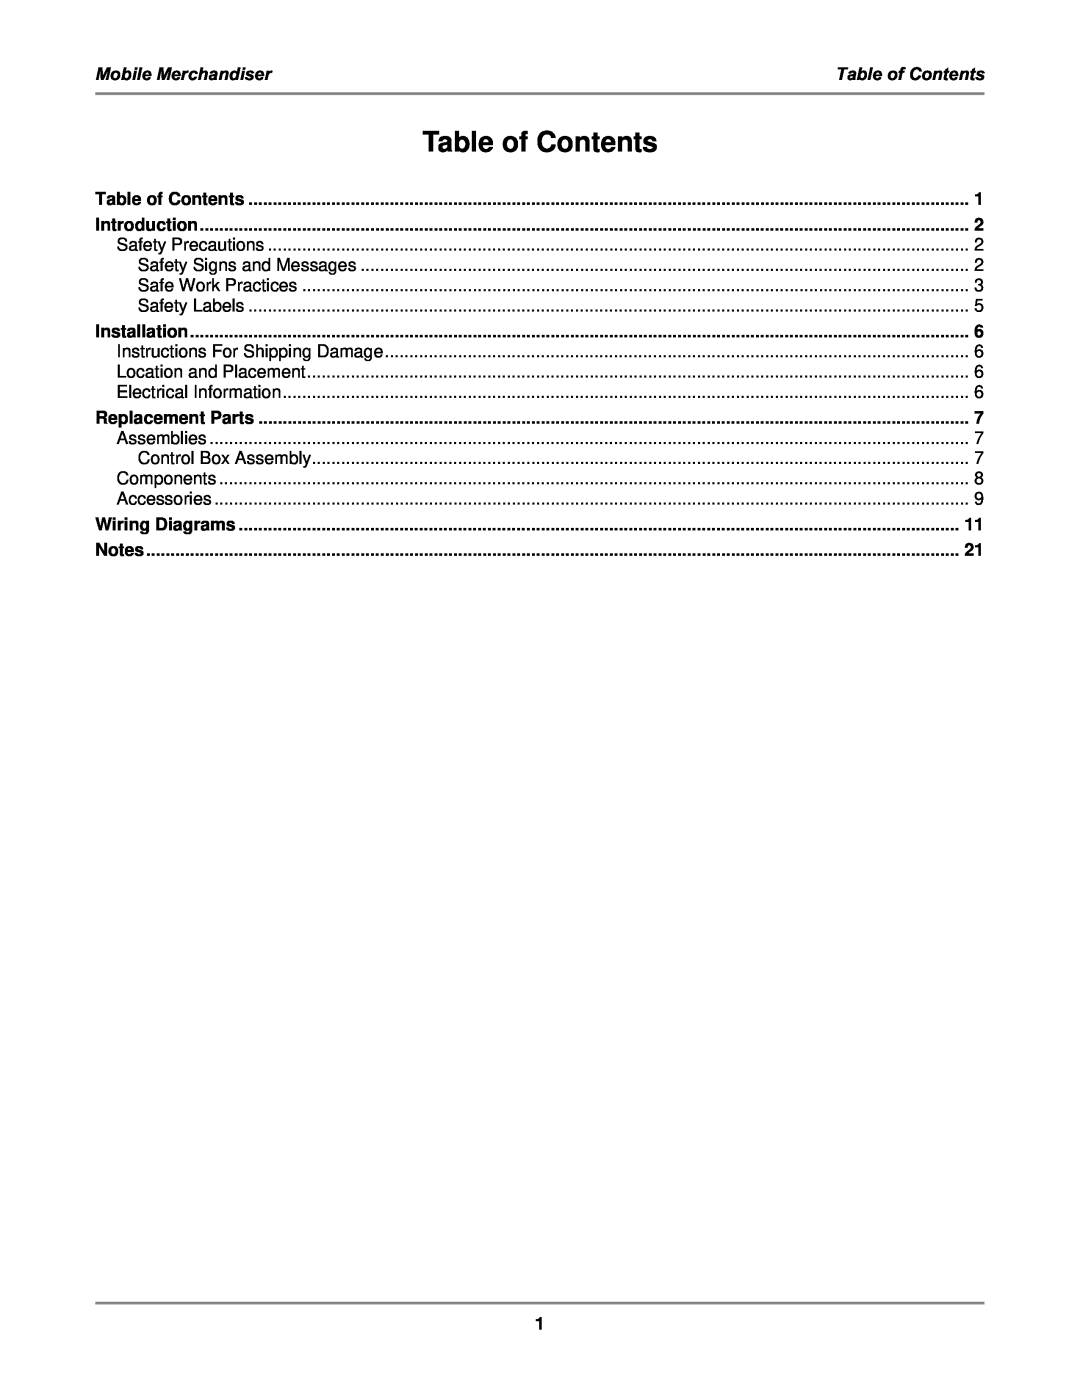 Bakers Pride Oven MM6, MM4 service manual Mobile Merchandiser, Table of Contents 